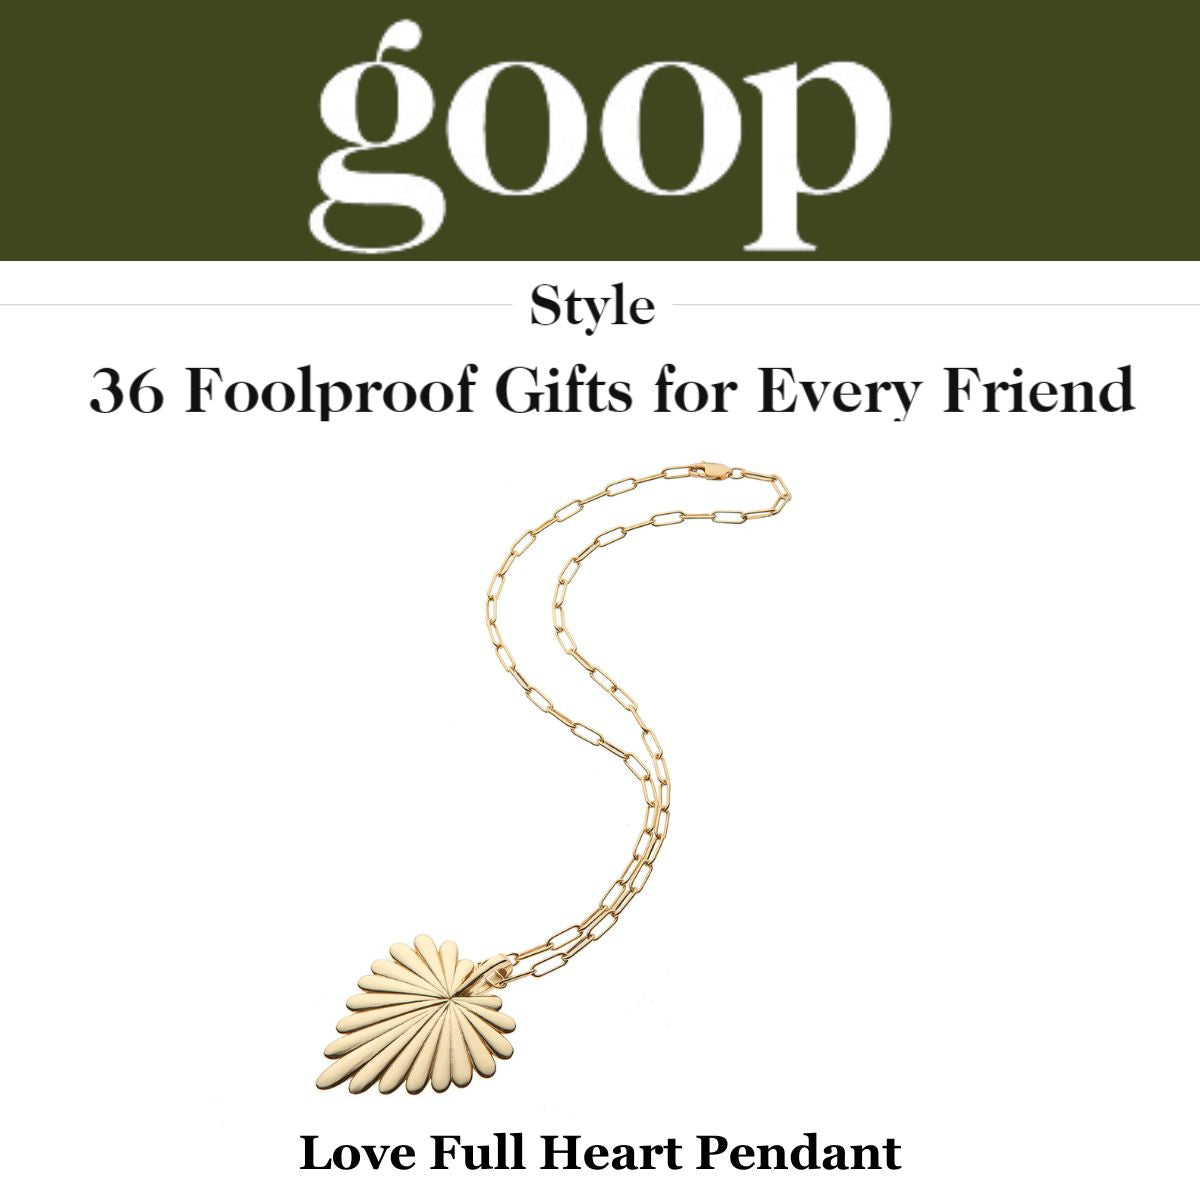 Press Highlight: Goop's "36 Foolproof Gifts for Every Friend"